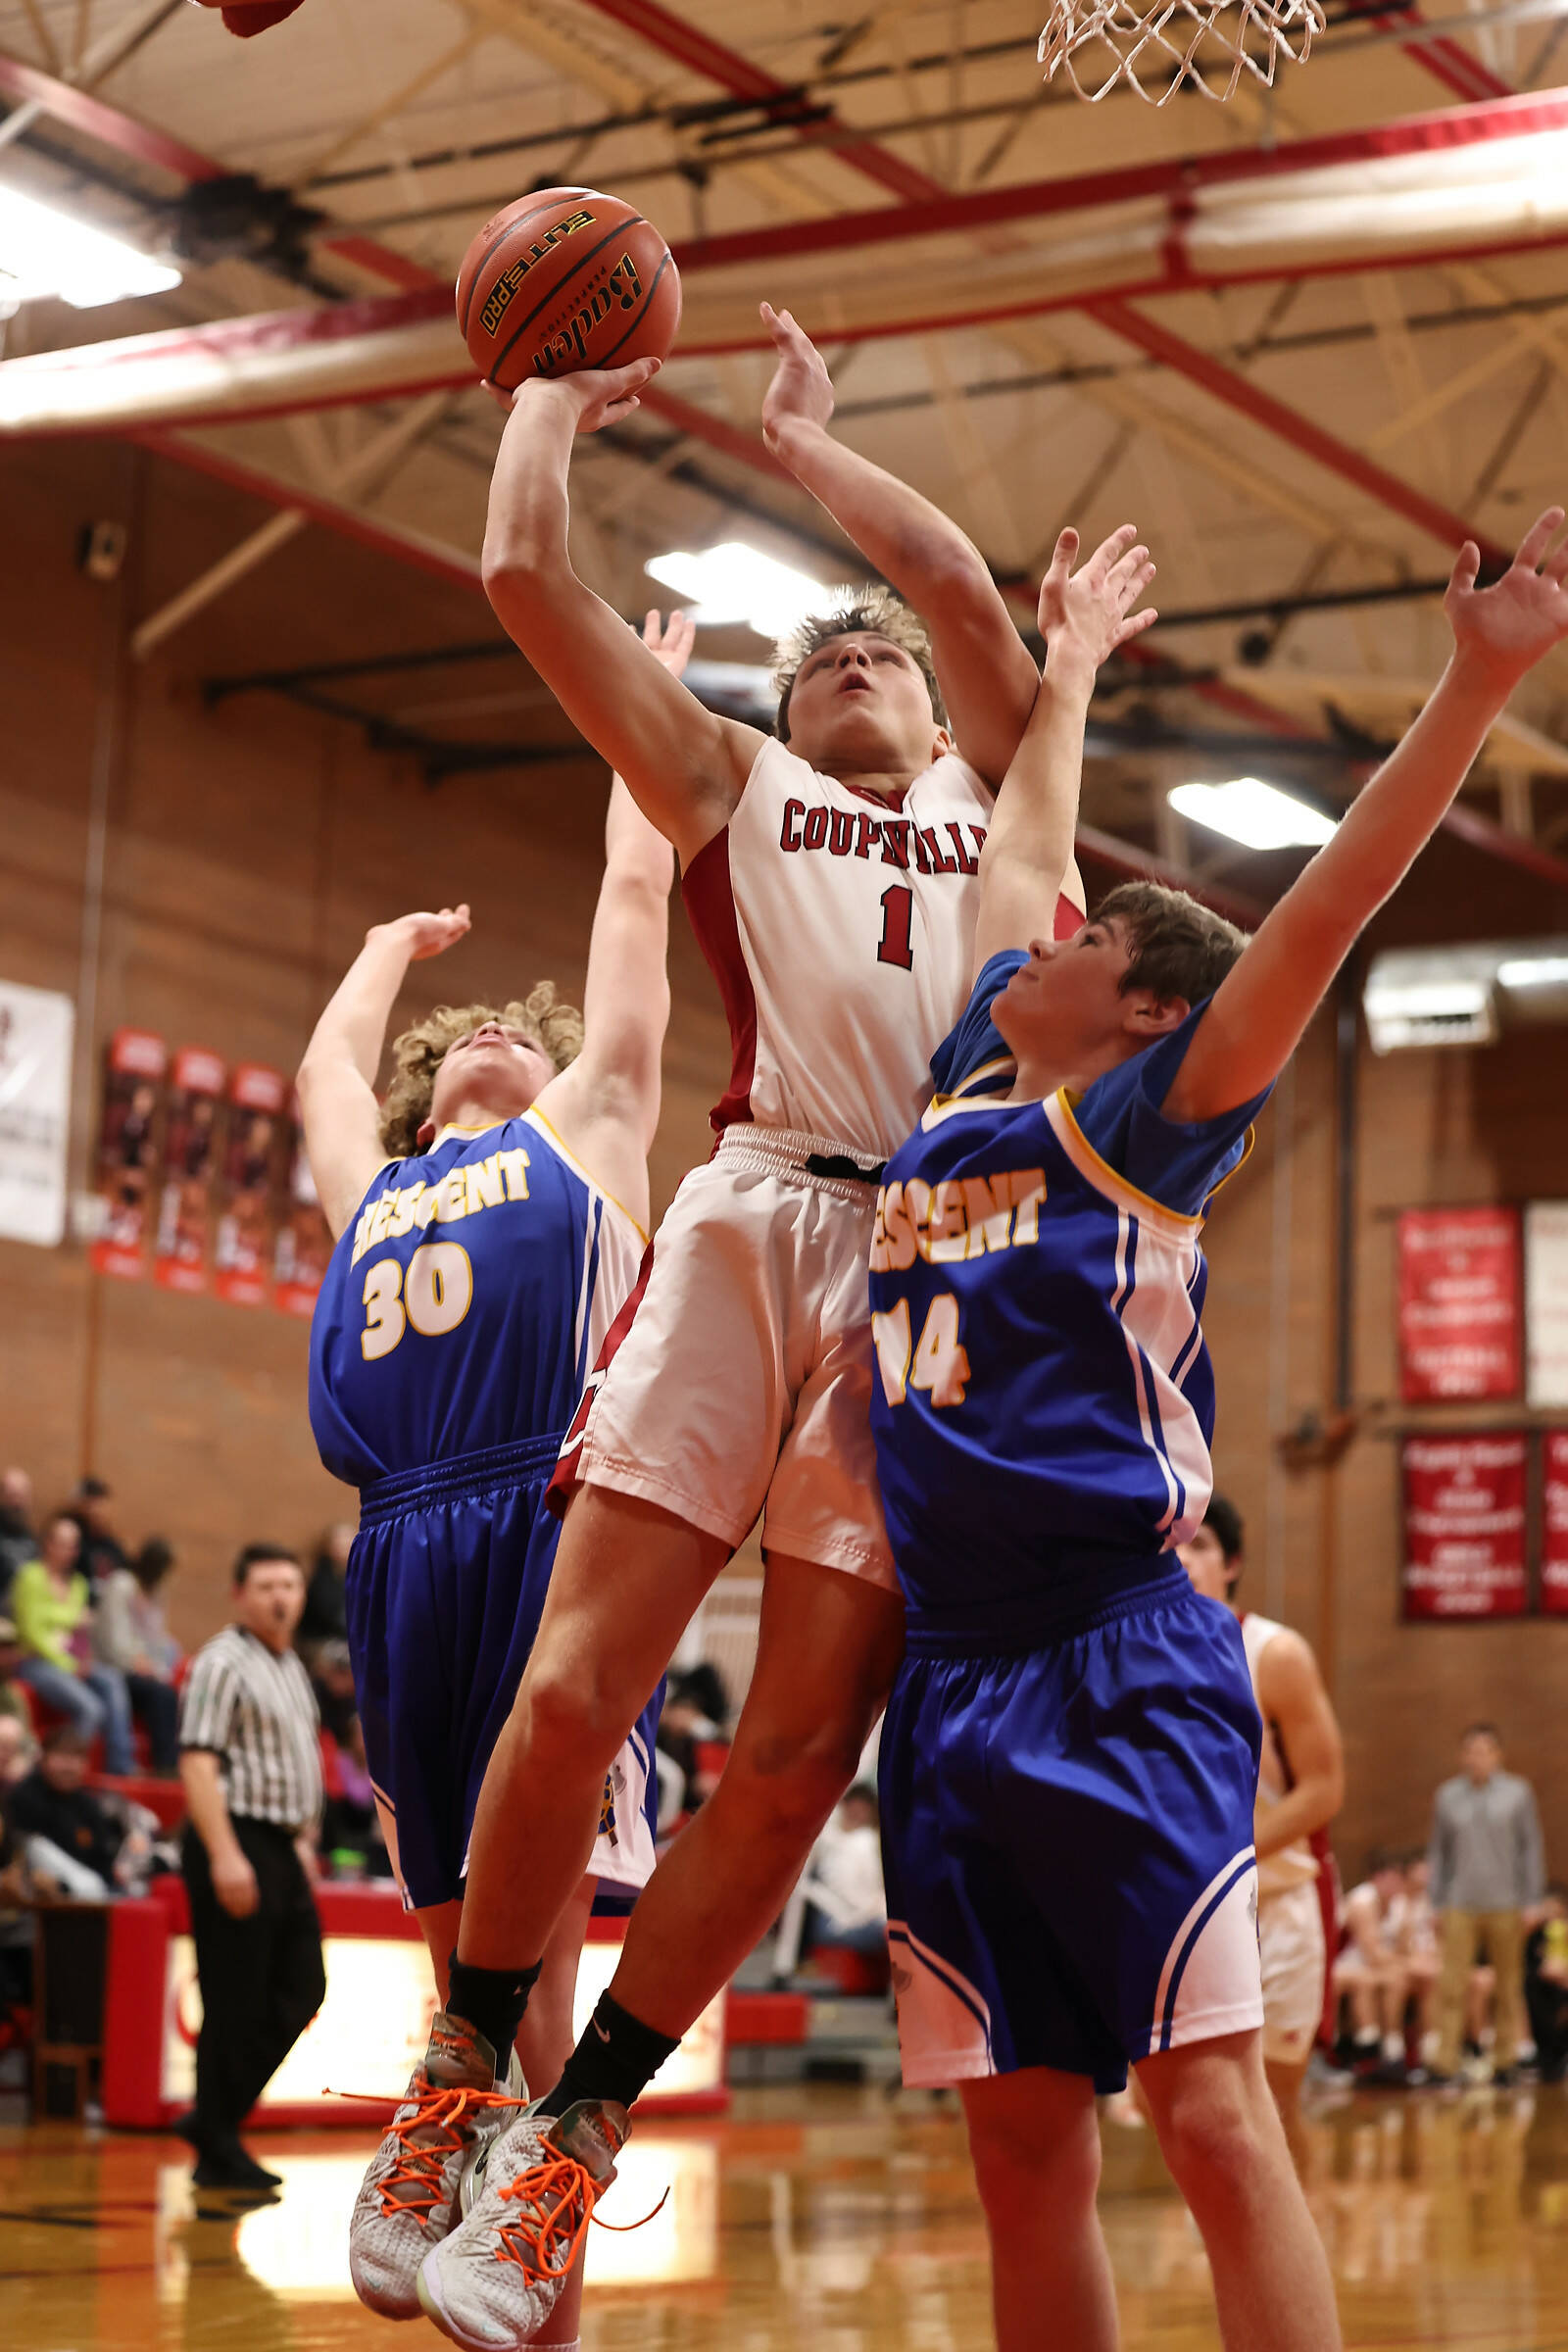 Photo by John Fisken
Coupeville High School senior Dominic Coffman shoots amid pressure from opposing Crescent players during a game at home Wednesday night. The boys team beat Crescent 60-14, ending the opponent’s previously undefeated season.